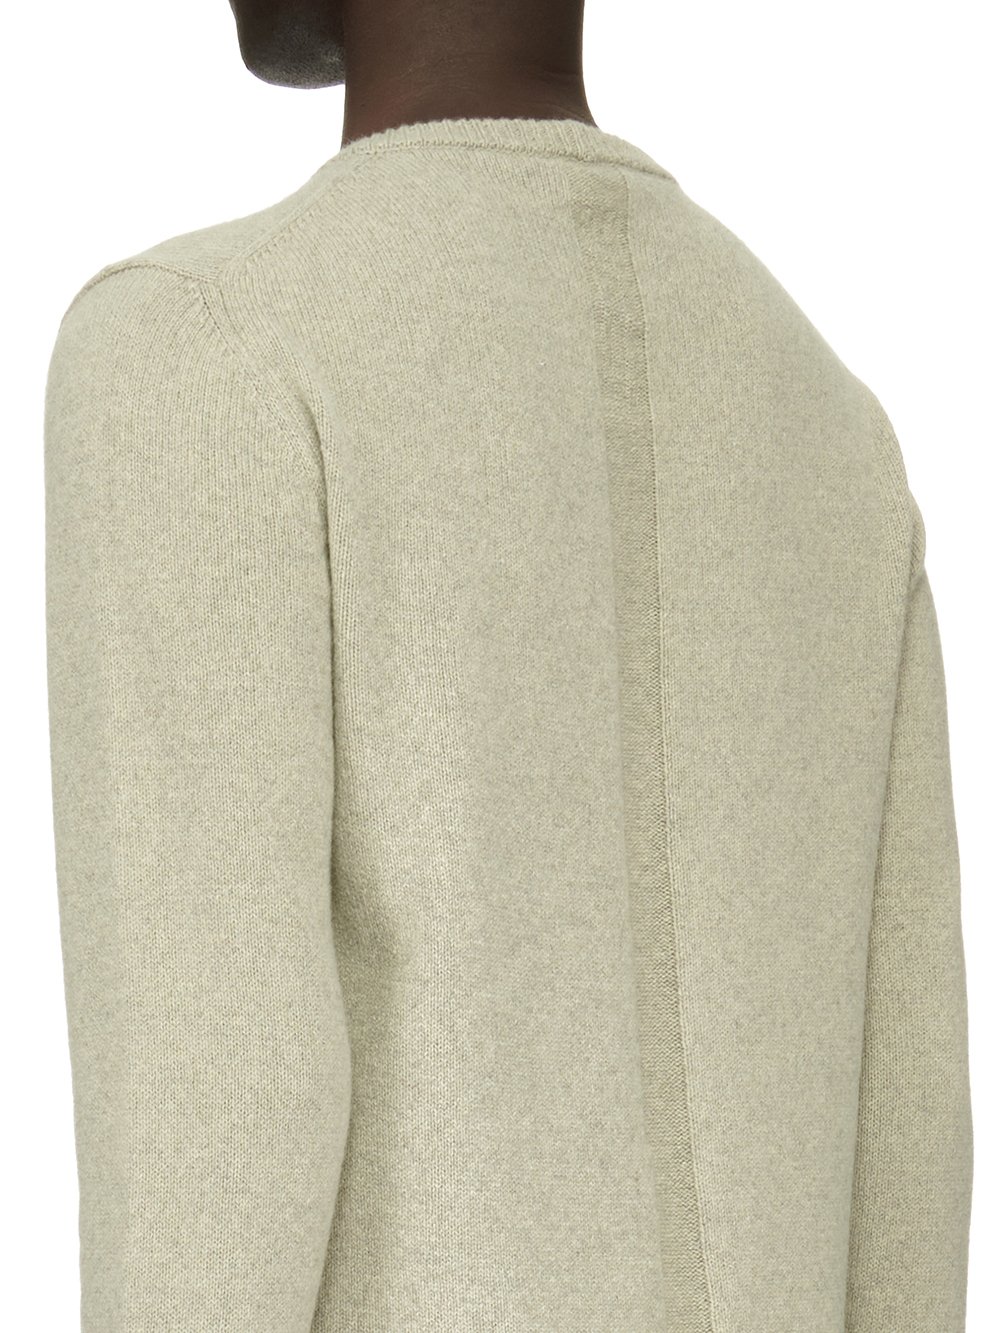 RICK OWENS FW23 LUXOR BIKER ROUND NECK IN PEARL RECYCLED CASHMERE KNIT